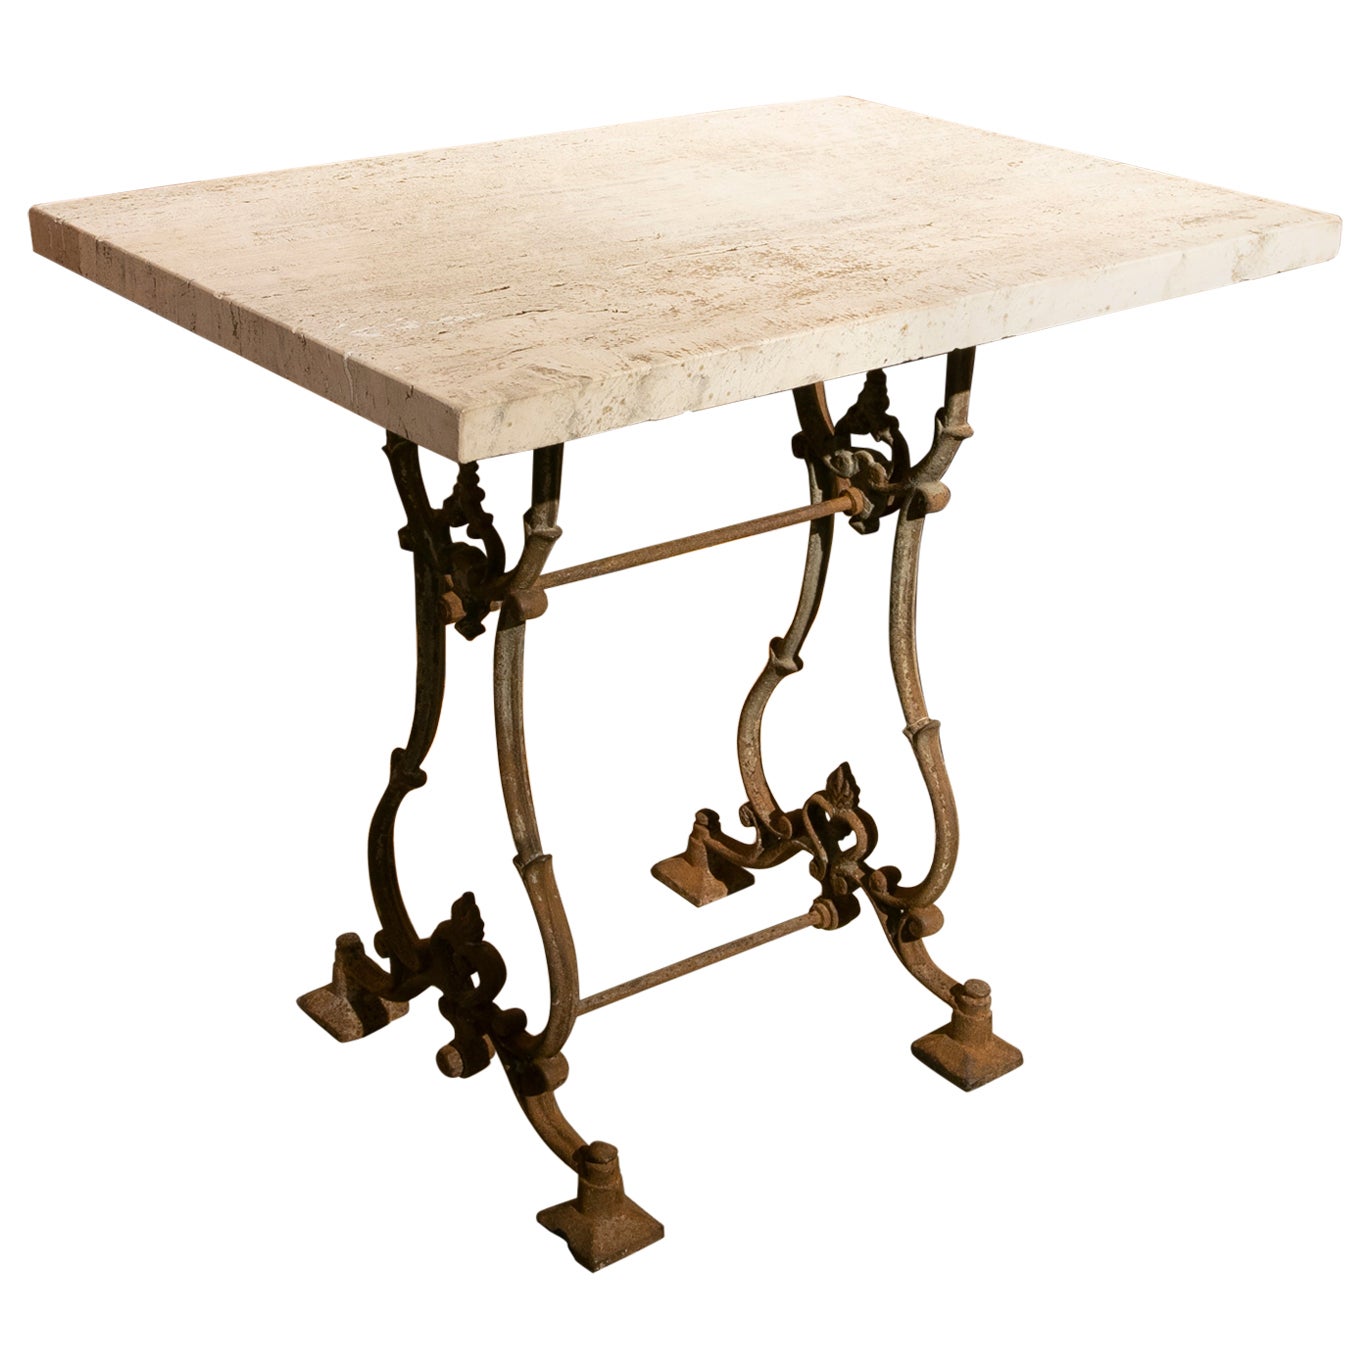 1970s Spanish Iron Table with Italian Travertine Top For Sale